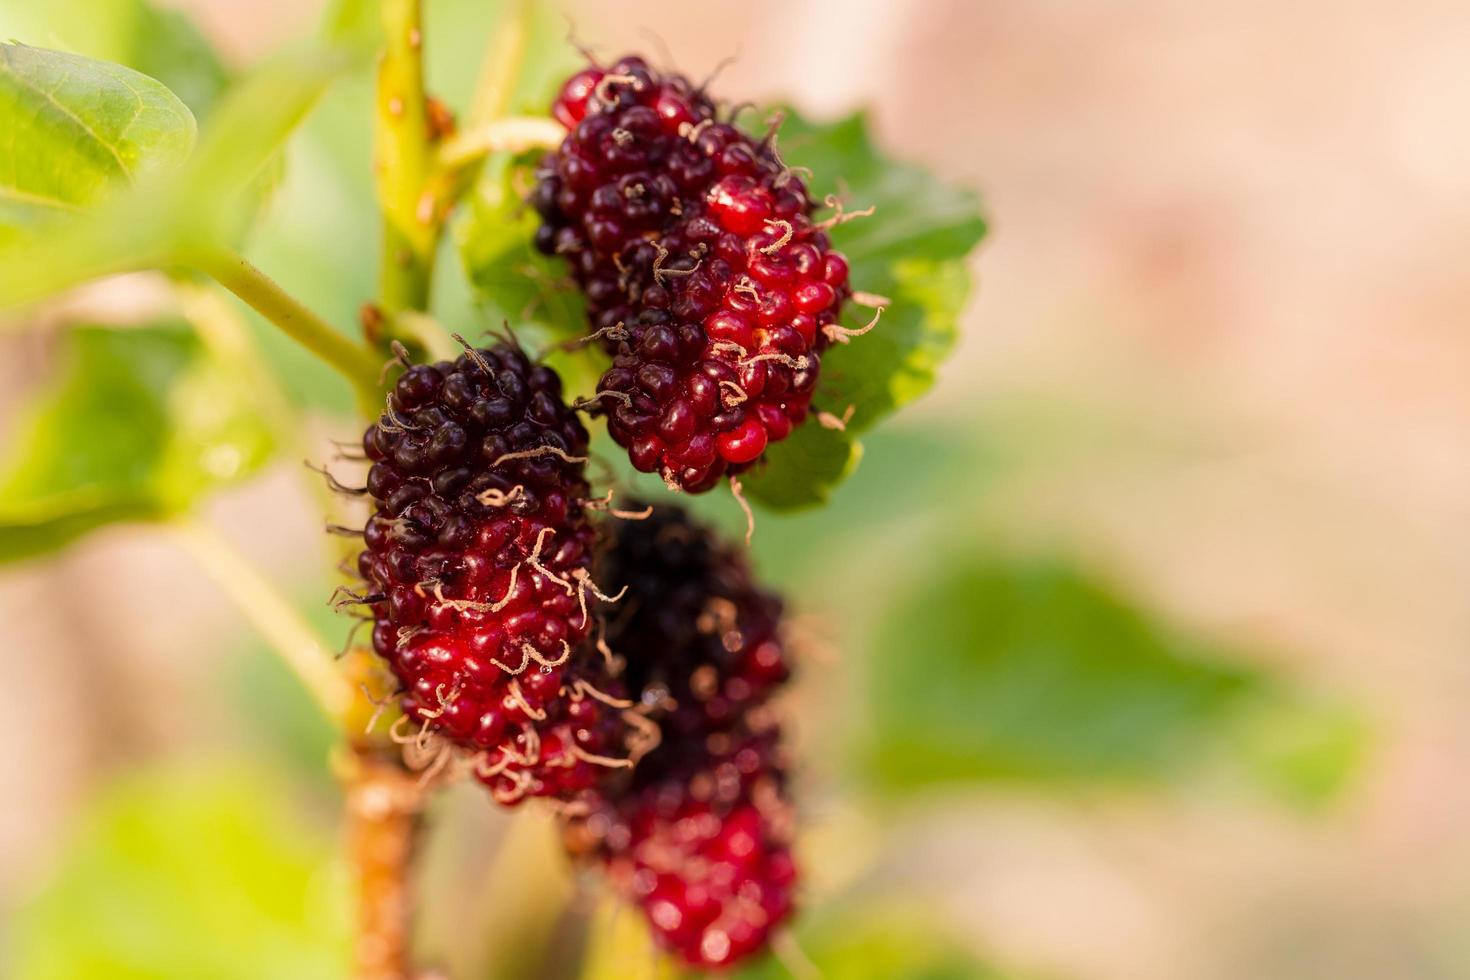 Fresh mulberry, black ripe and red unripe mulberries hanging on a branch photo